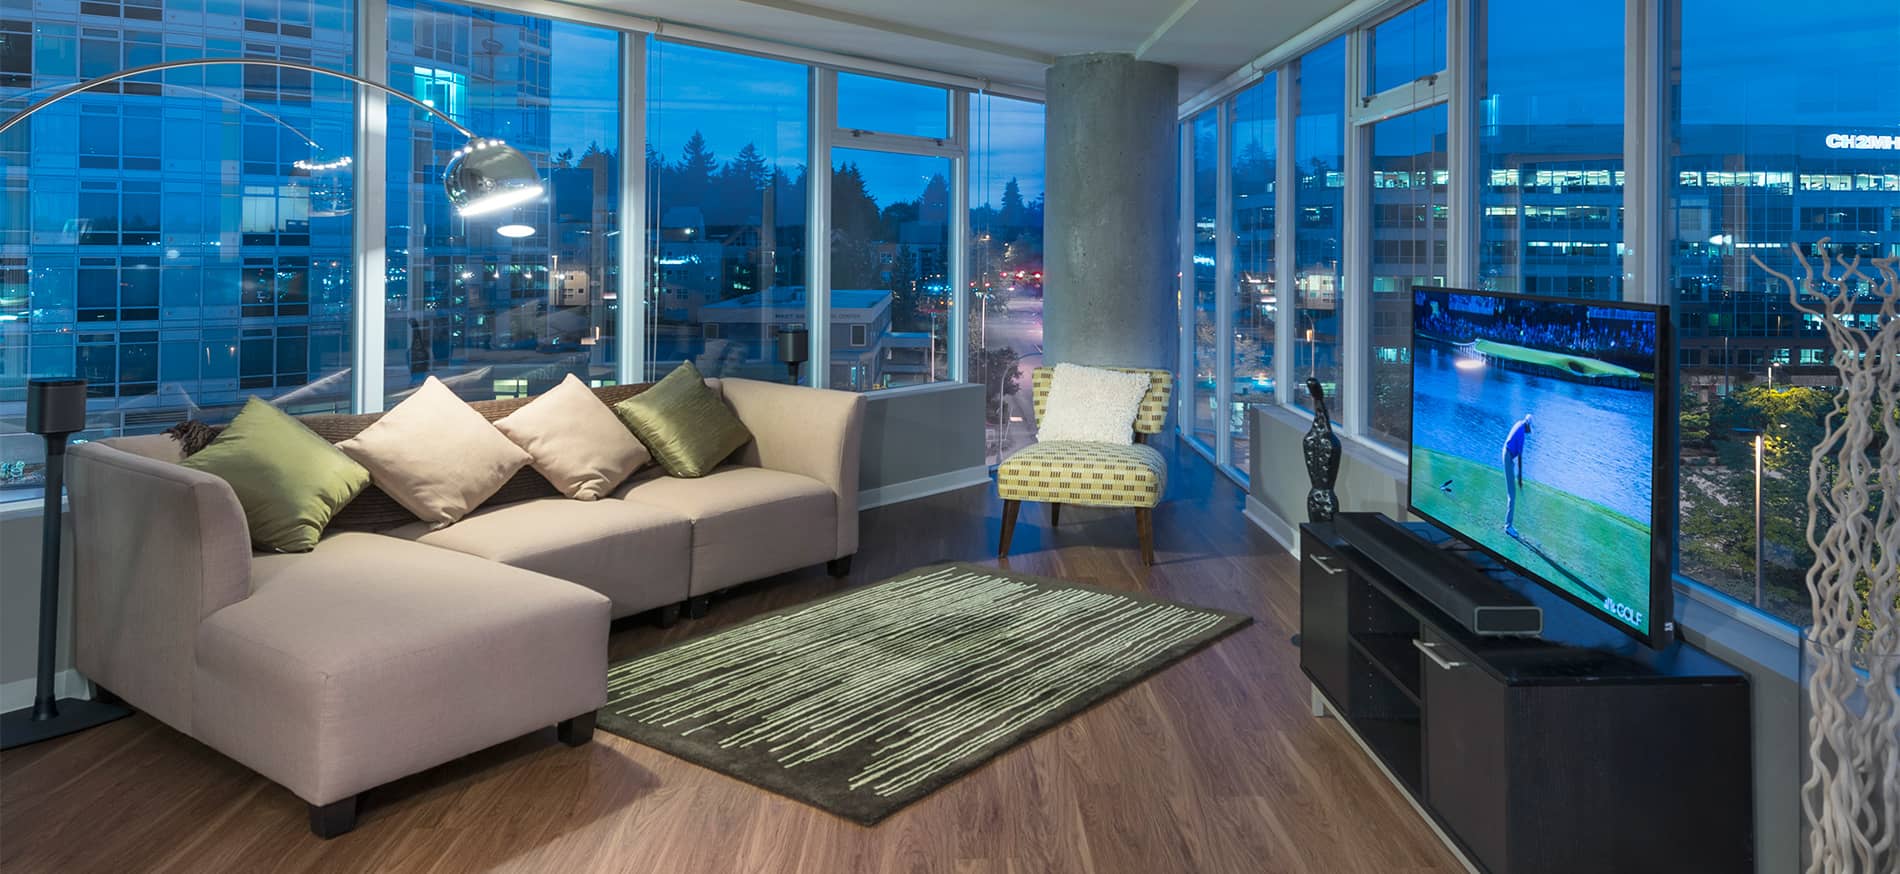 Apartments And Pricing For Elements Apartments Seattle